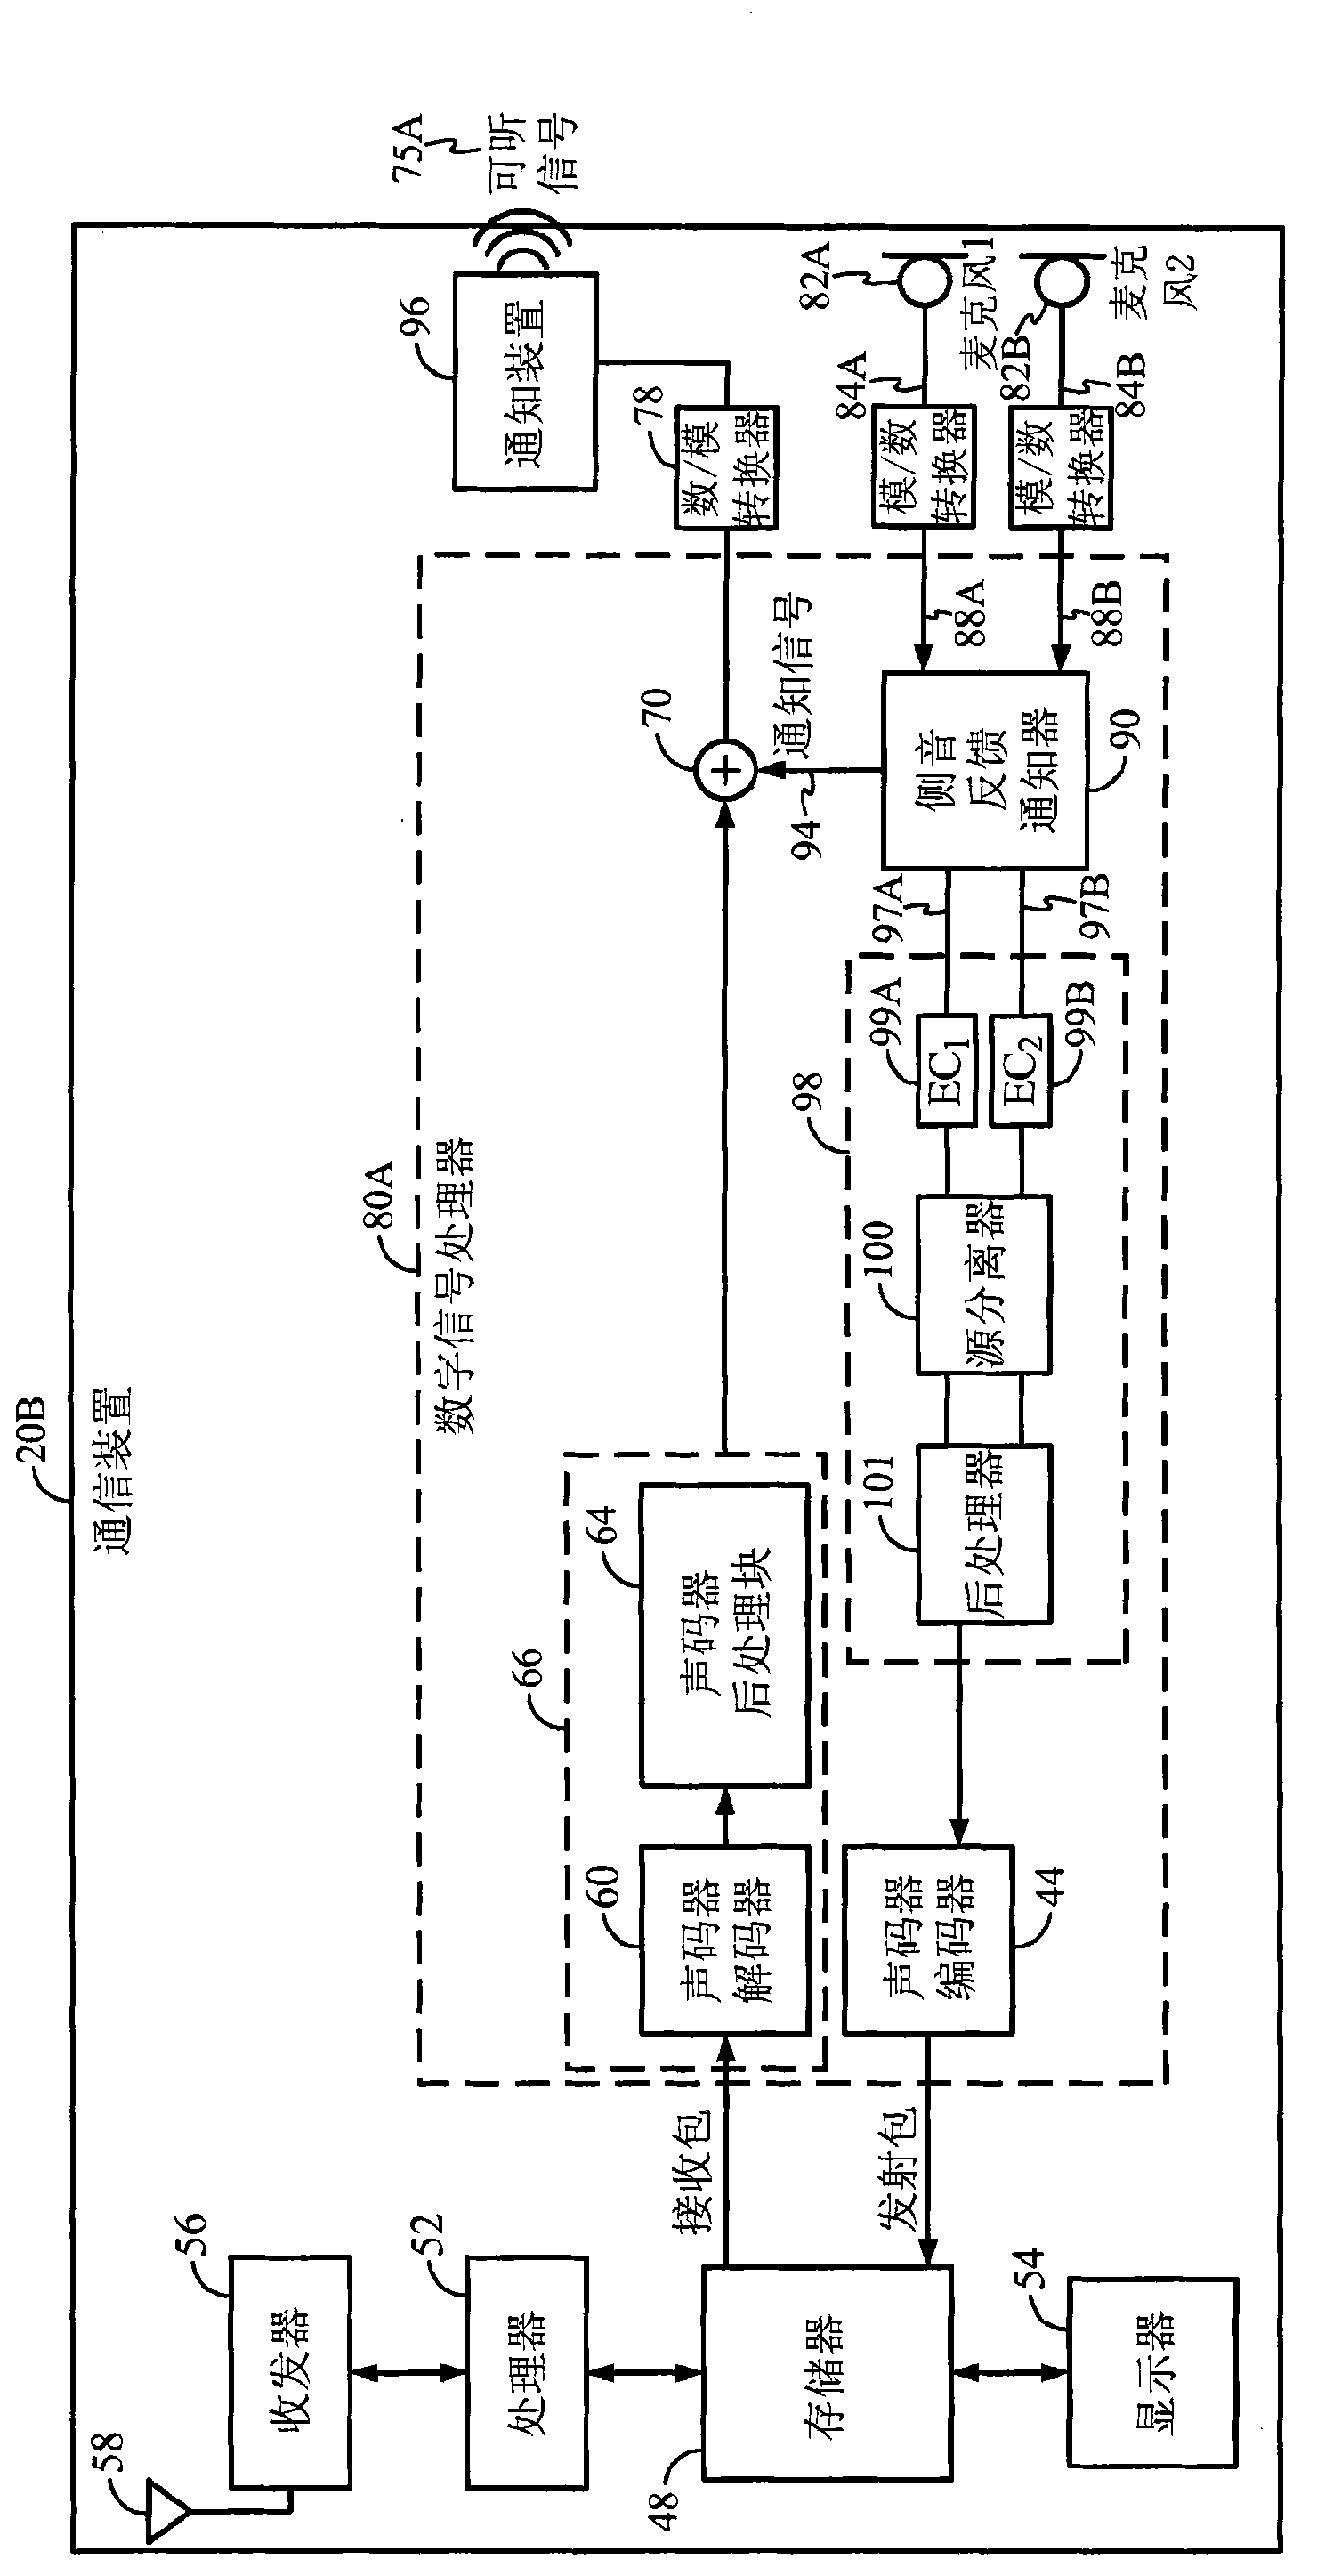 Method and apparatus for providing audible, visual or tactile sidetone feedback notification to a user of a communication device with multiple microphones